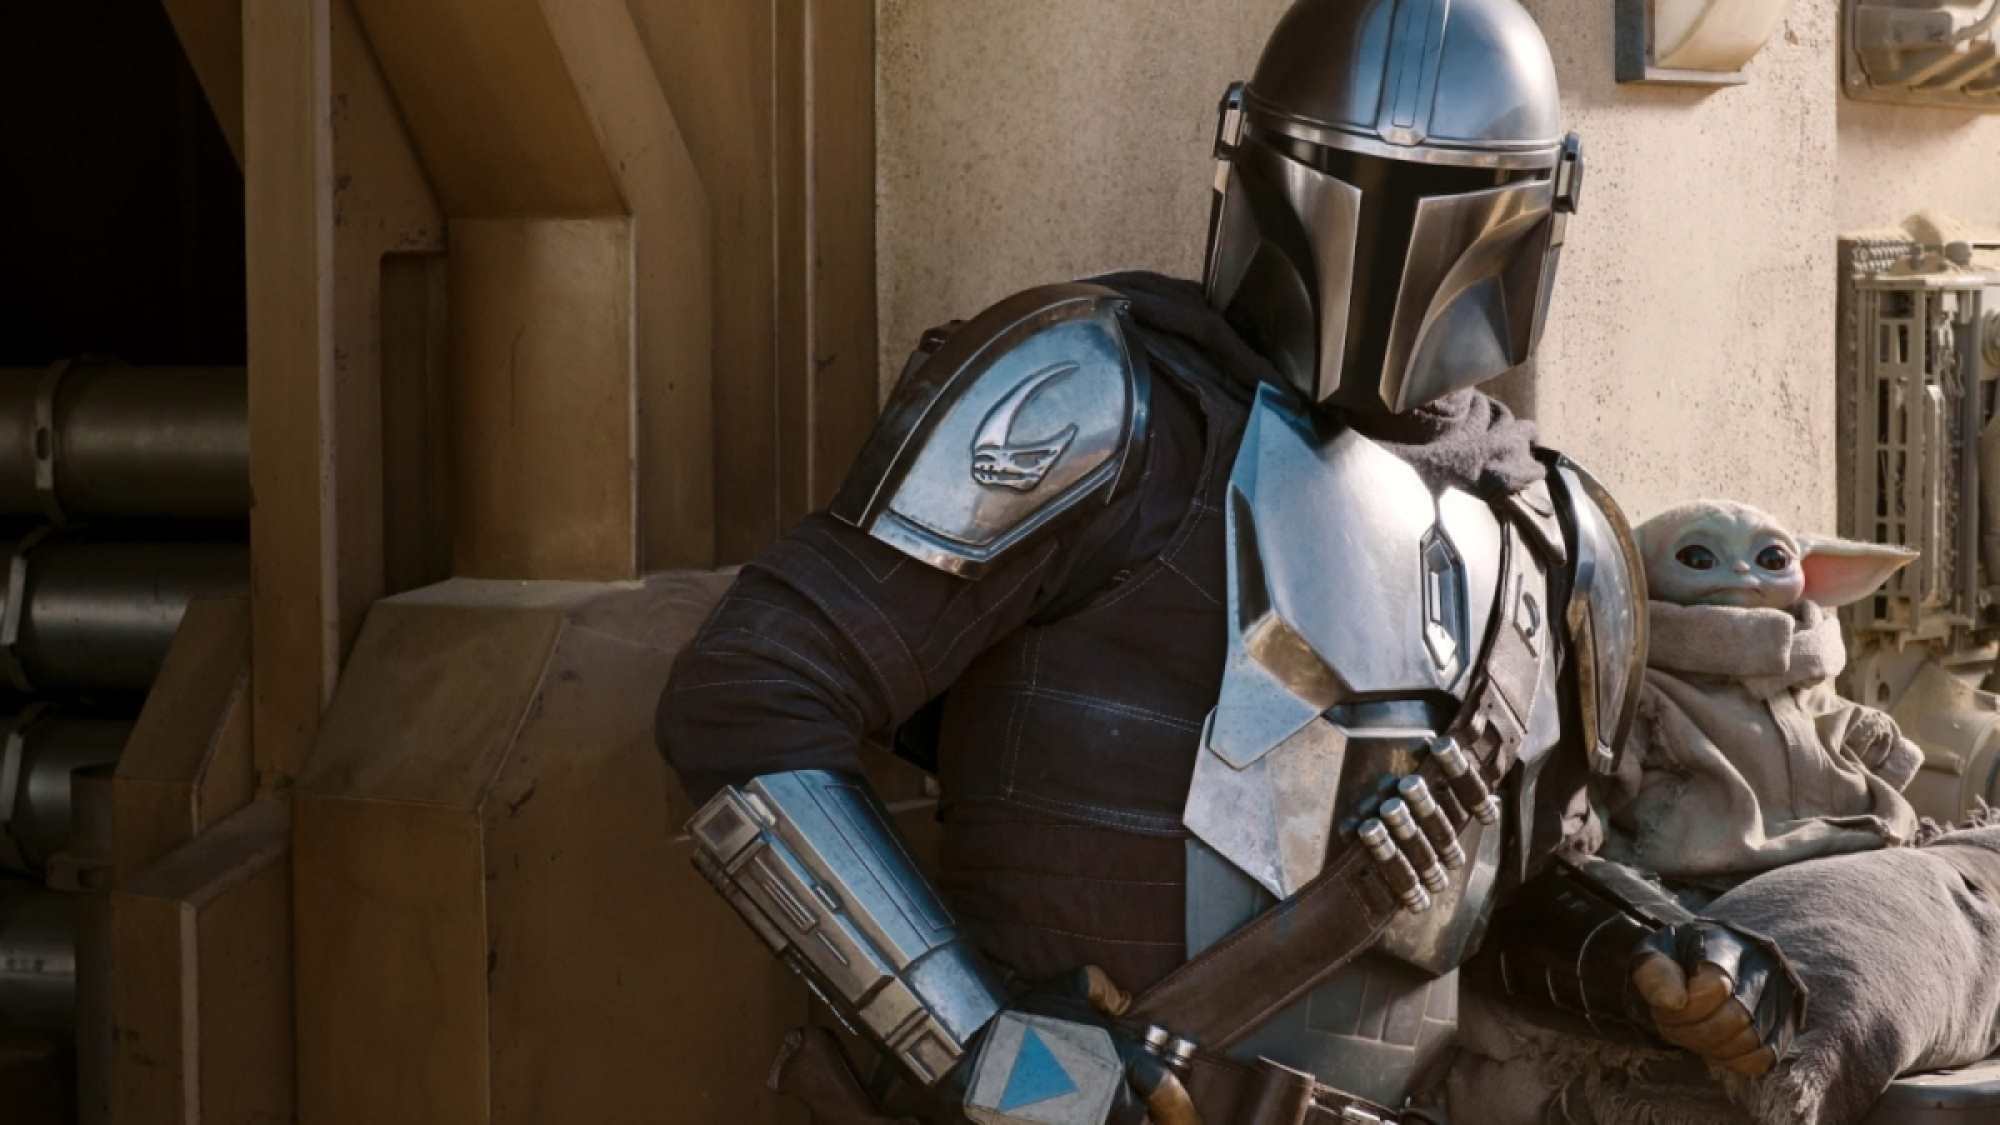 The Mandalorian and Grogu are reunited in the season finale of The Book of Boba Fett